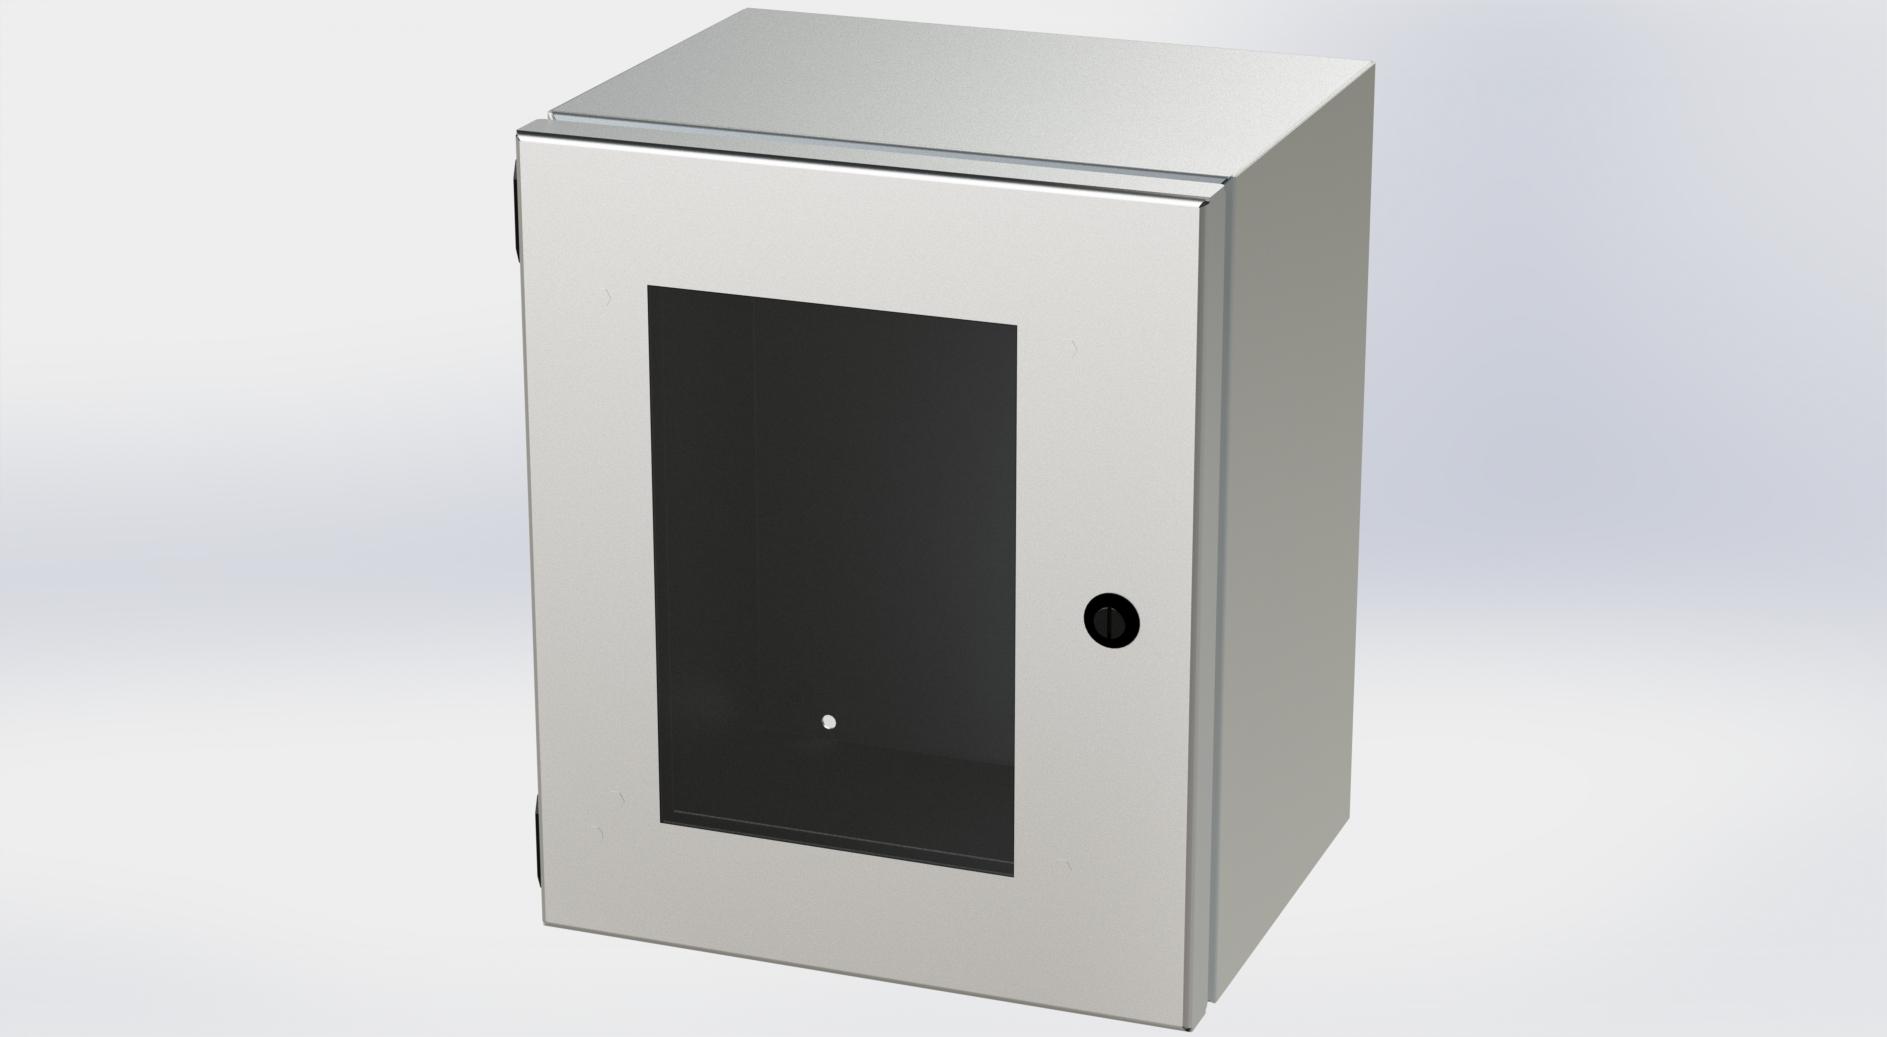 Saginaw Control SCE-12108ELJWSS S.S. ELJ Enclosure W/Viewing Window, Height:12.00", Width:10.00", Depth:8.00", #4 brushed finish on all exterior surfaces. Optional sub-panels are powder coated white.